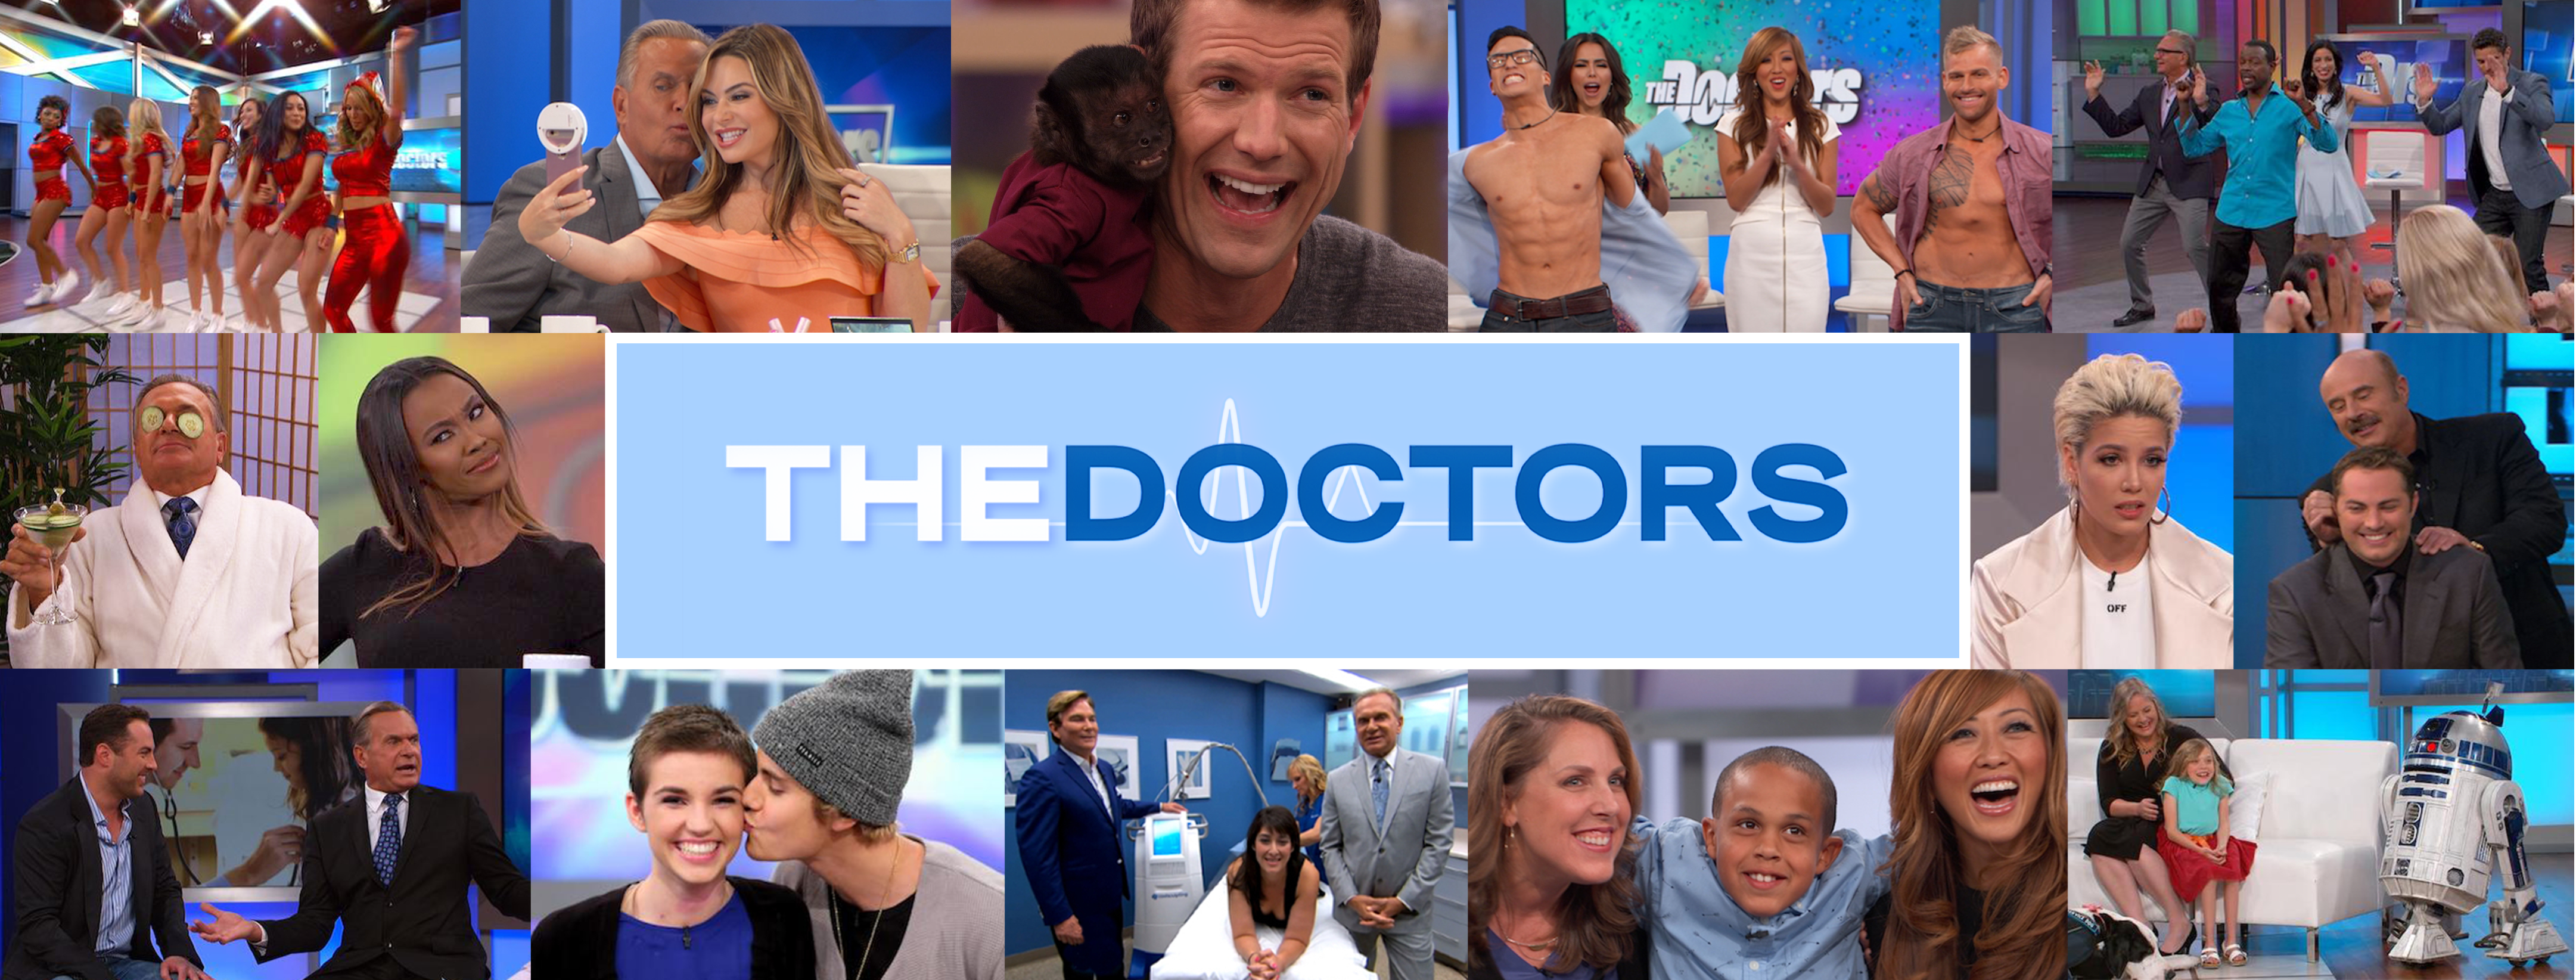 Living Without Arms | The Doctors TV Show